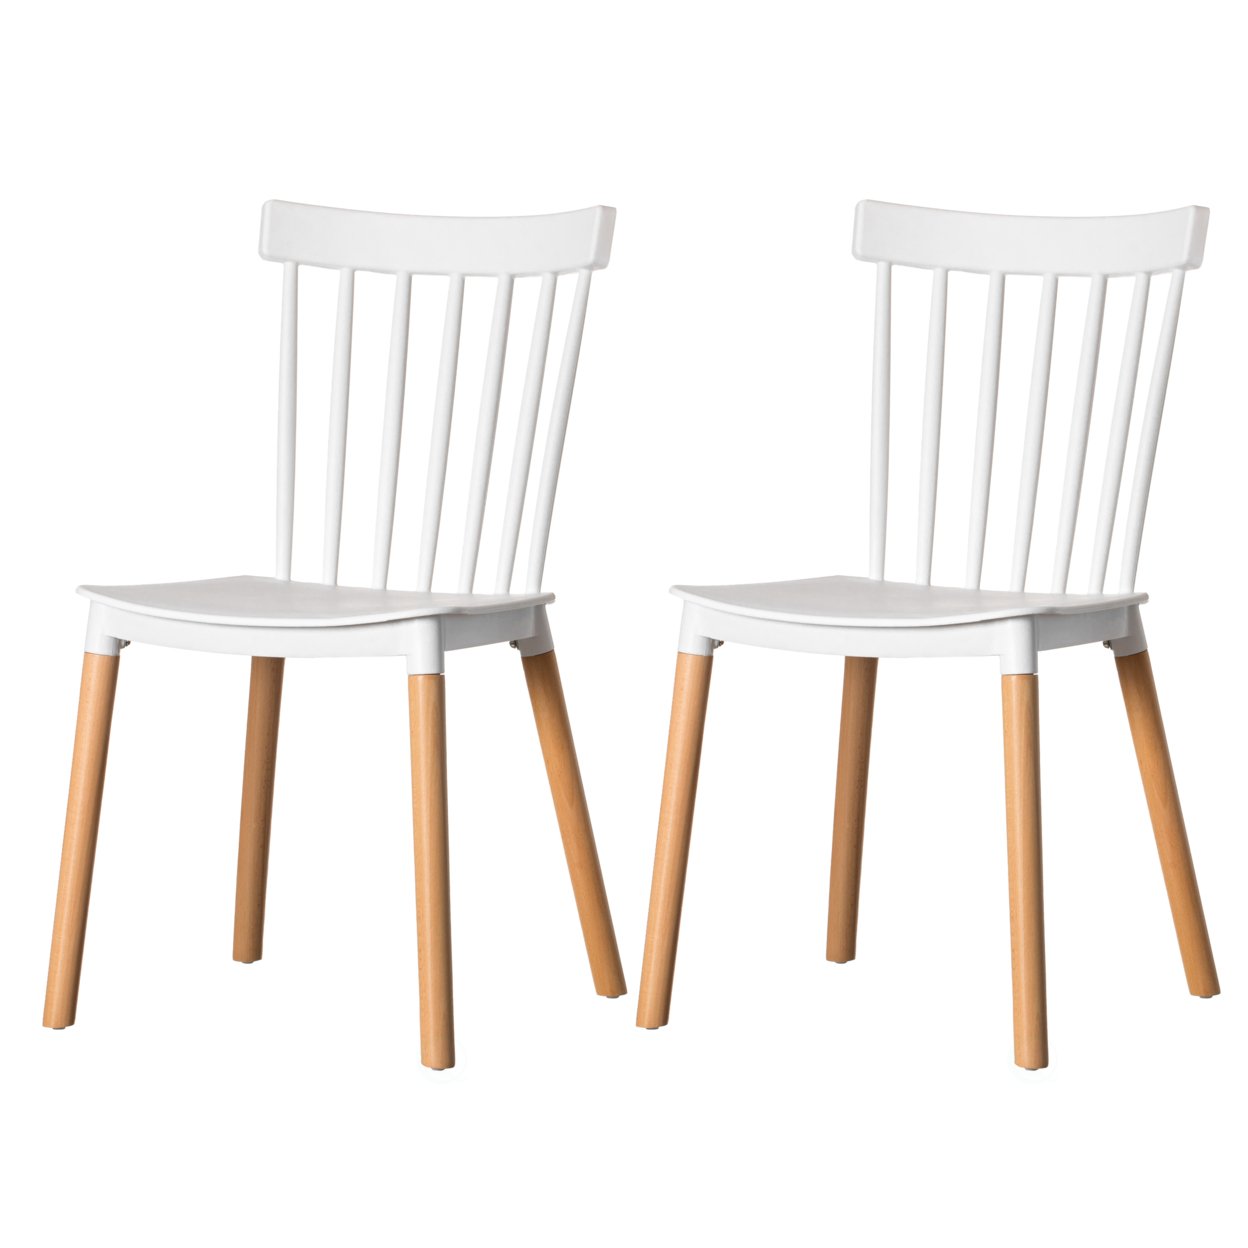 Modern Plastic Dining Chair Windsor Design With Beech Wood Legs - Set Of 2 White